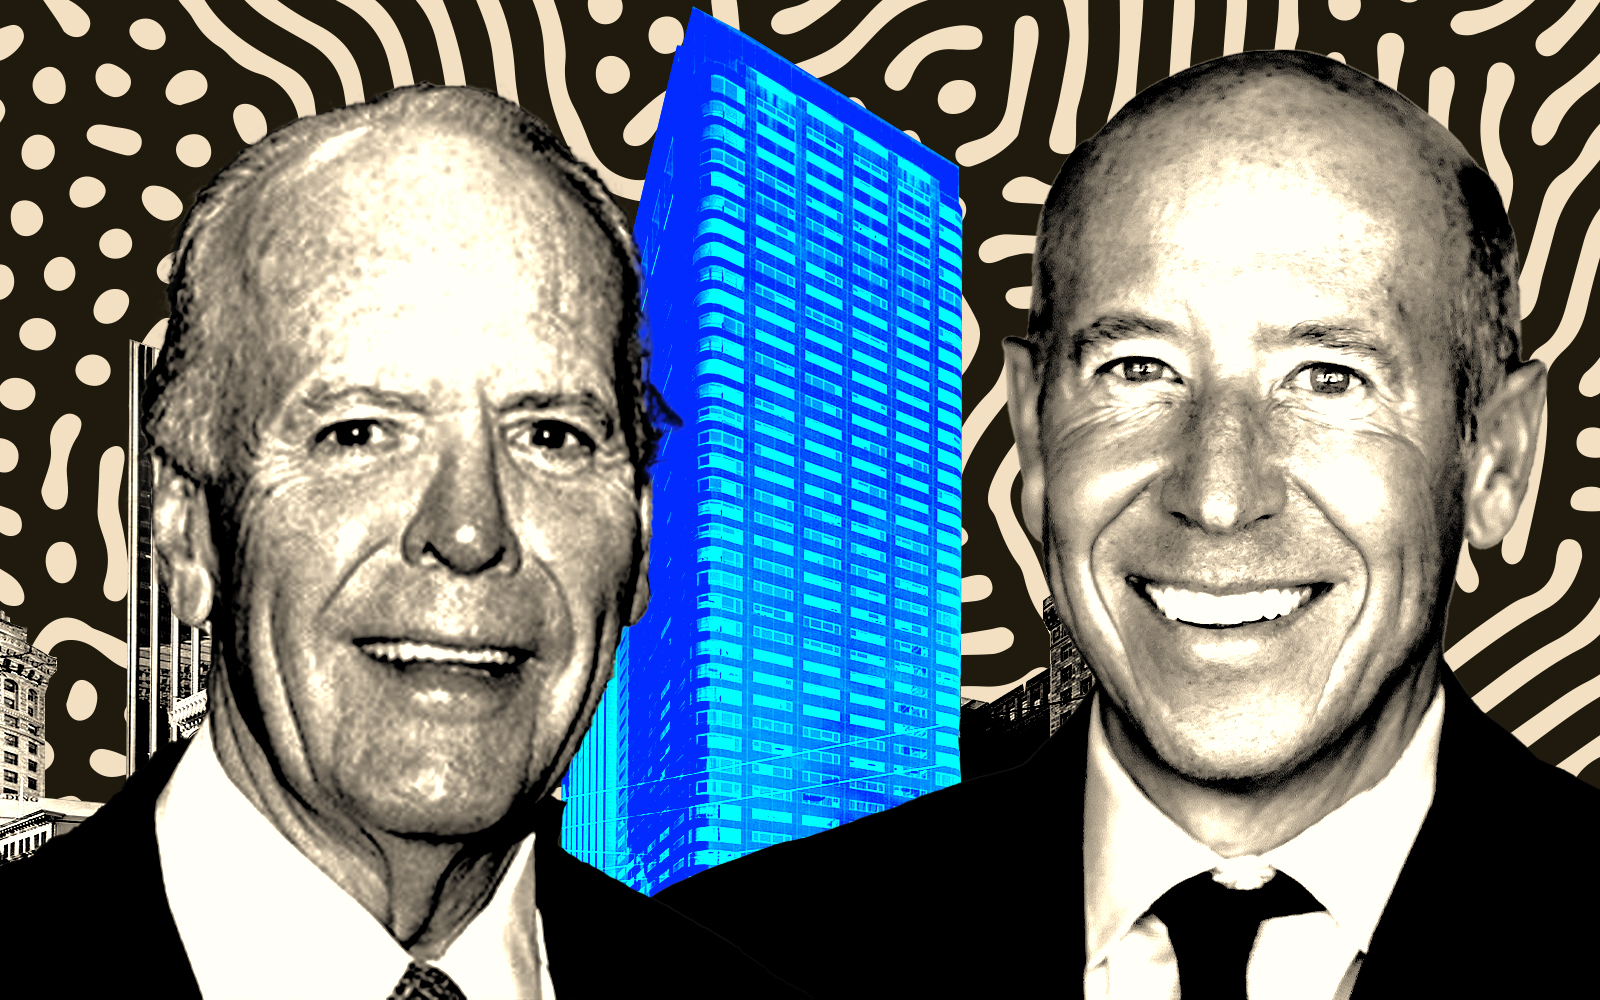 From left: One Sansome's Michael Barker and Starwood Capital Group's Barry S. Sternlicht (Getty, One Sansome)